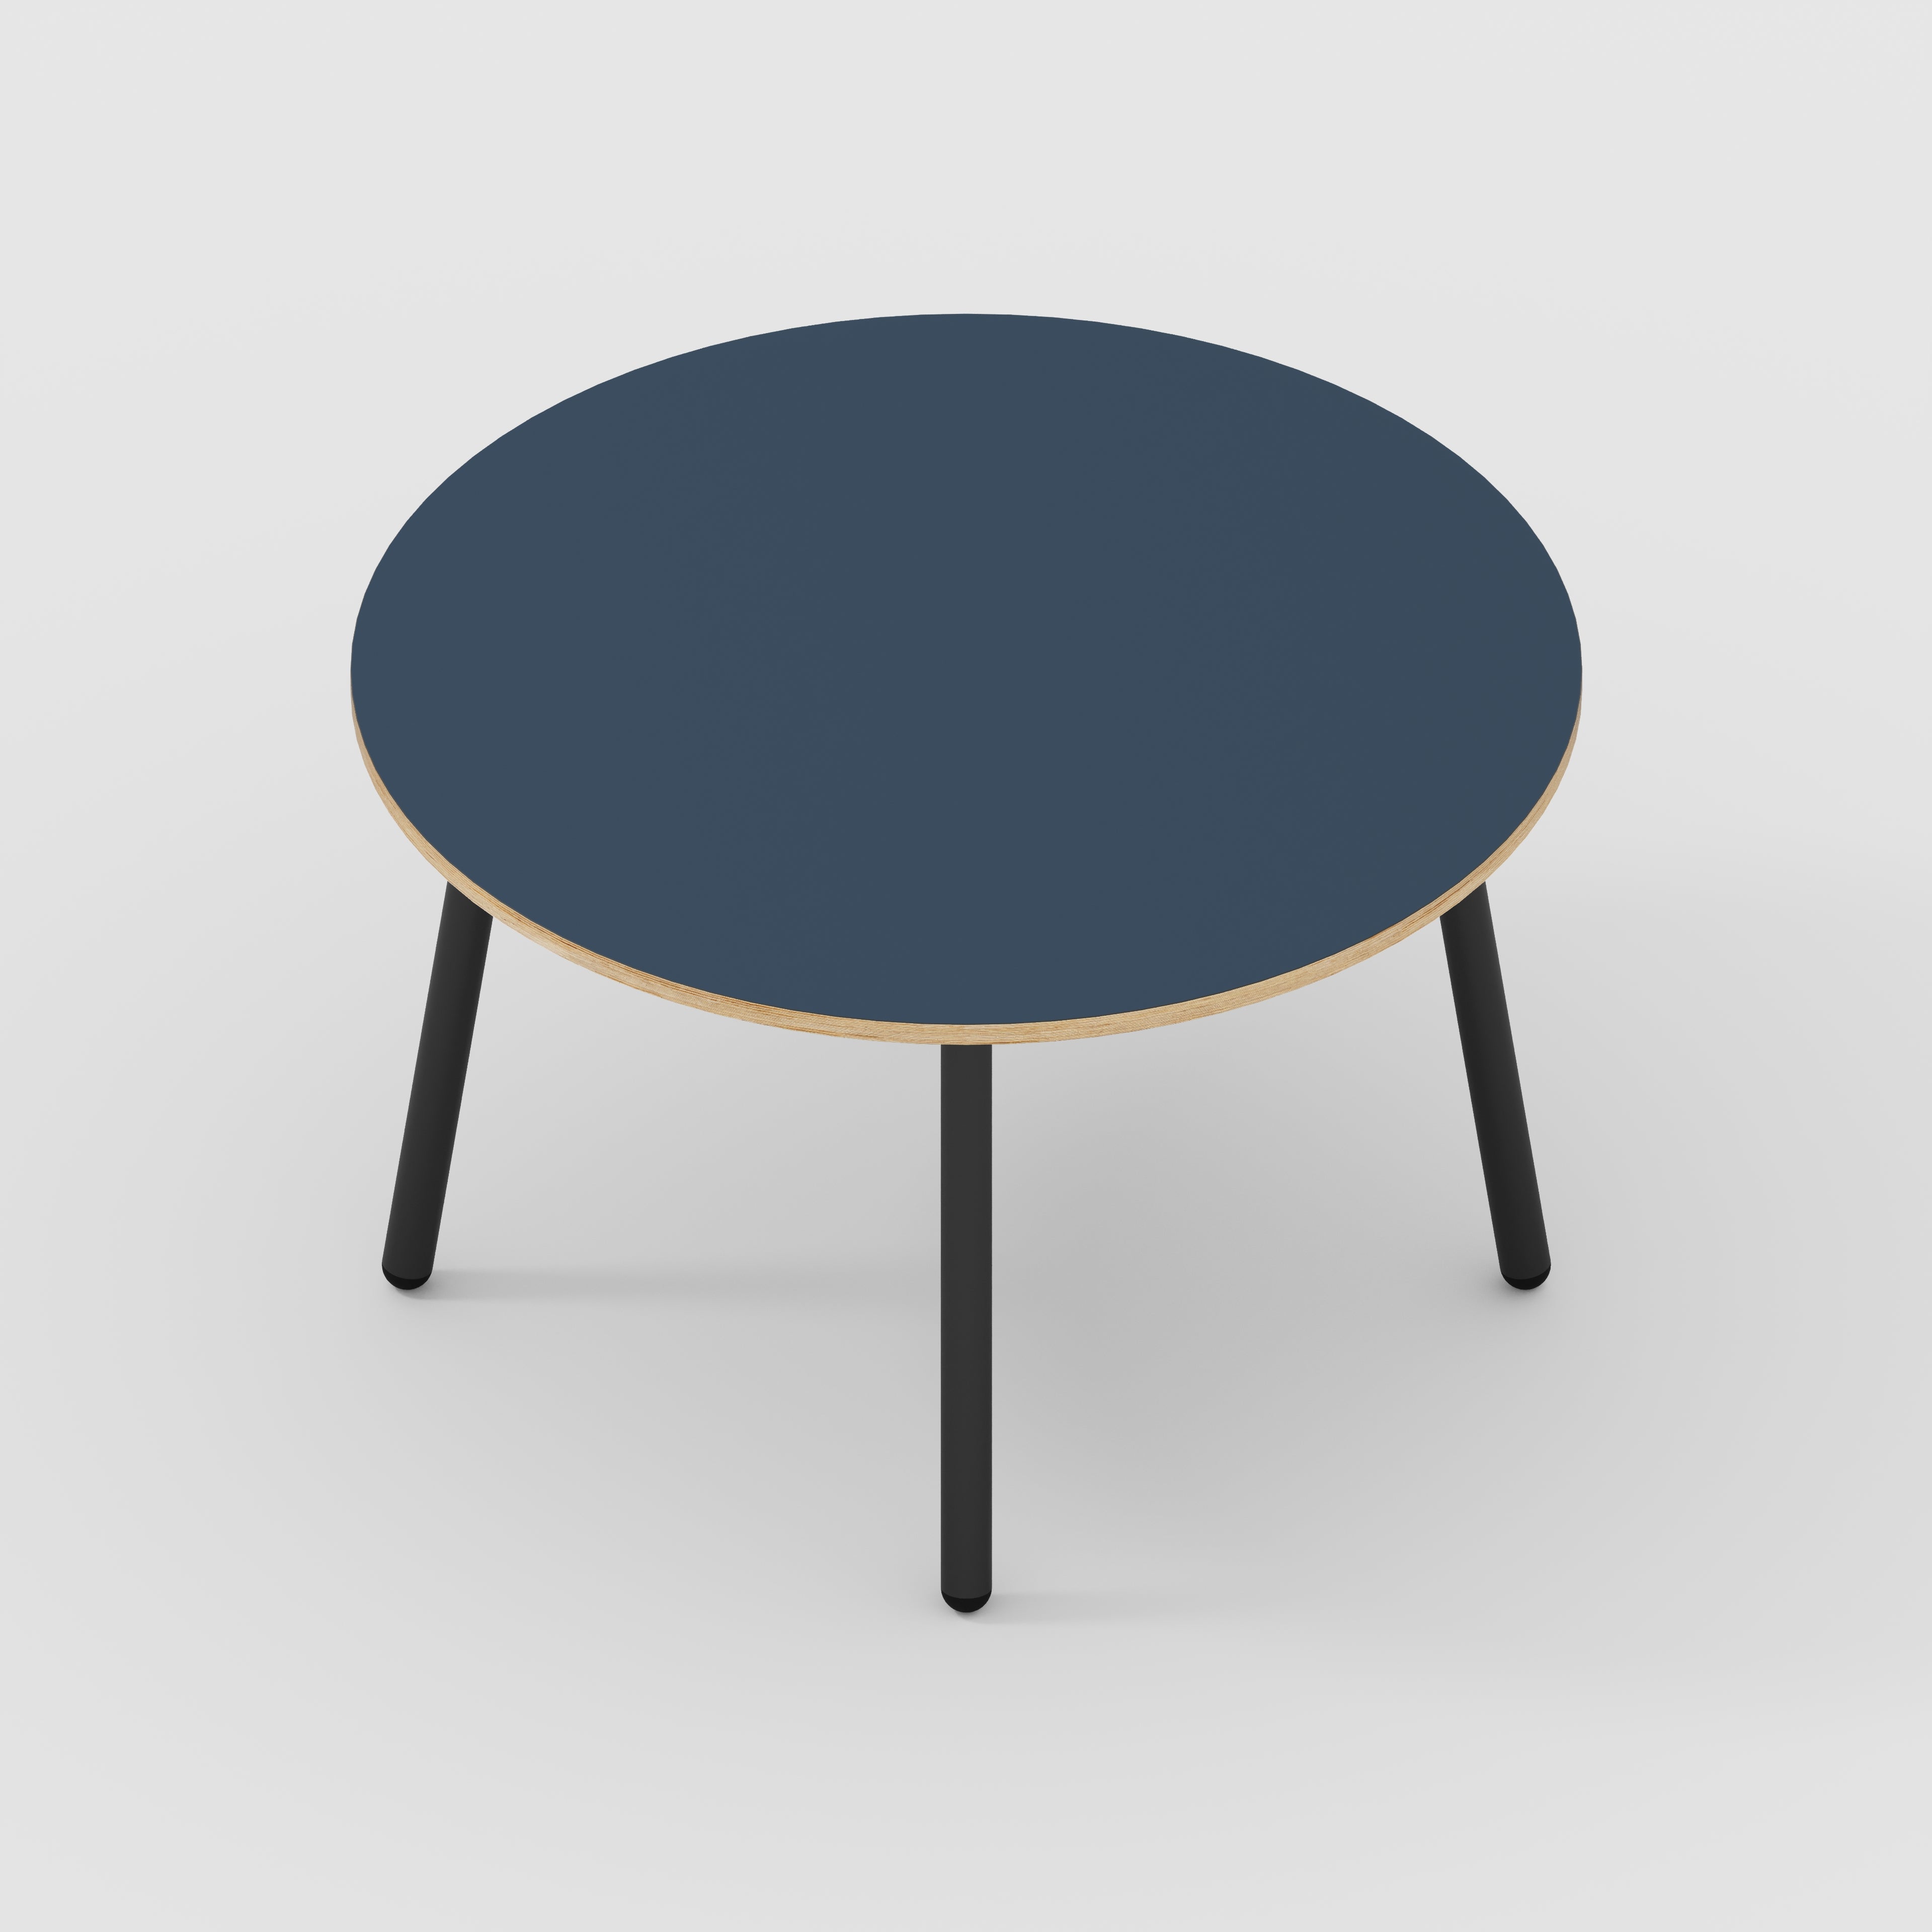 Round Table with Black Round Single Pin Legs - Formica Night Sea Blue - 1200(dia) x 735(h)